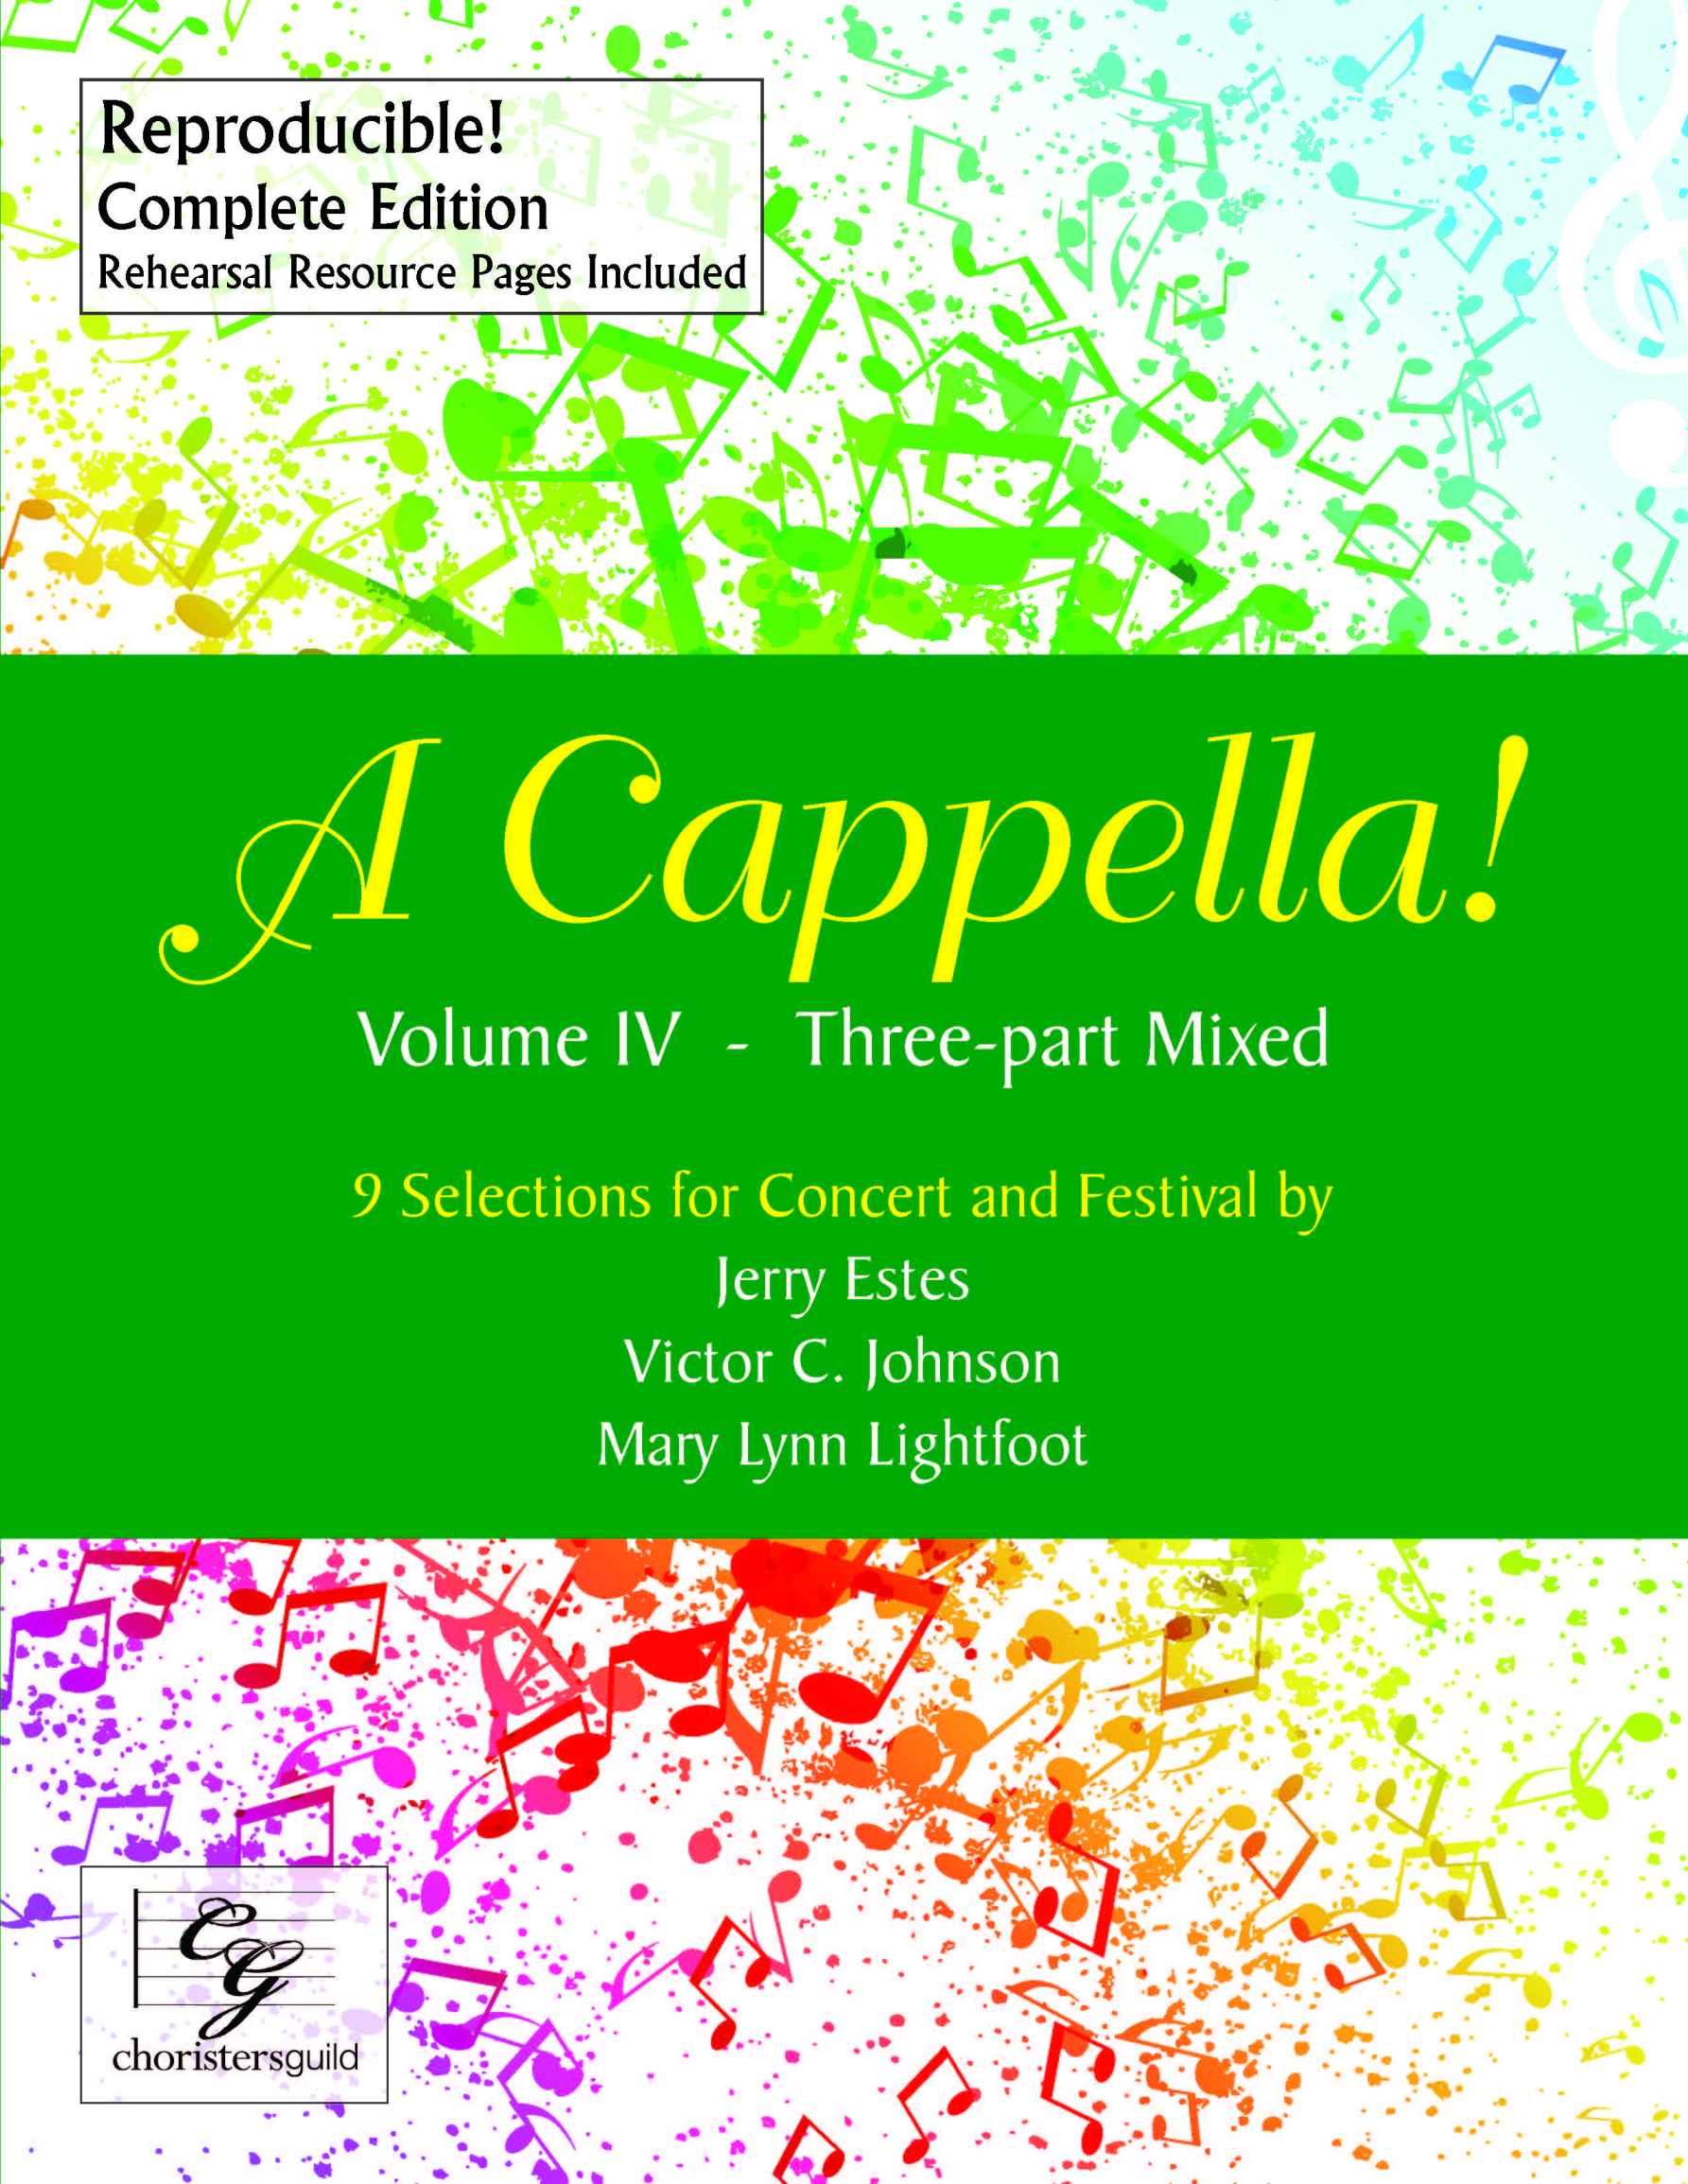 A Cappella! Volume IV - Three-part Mixed - Complete Edition